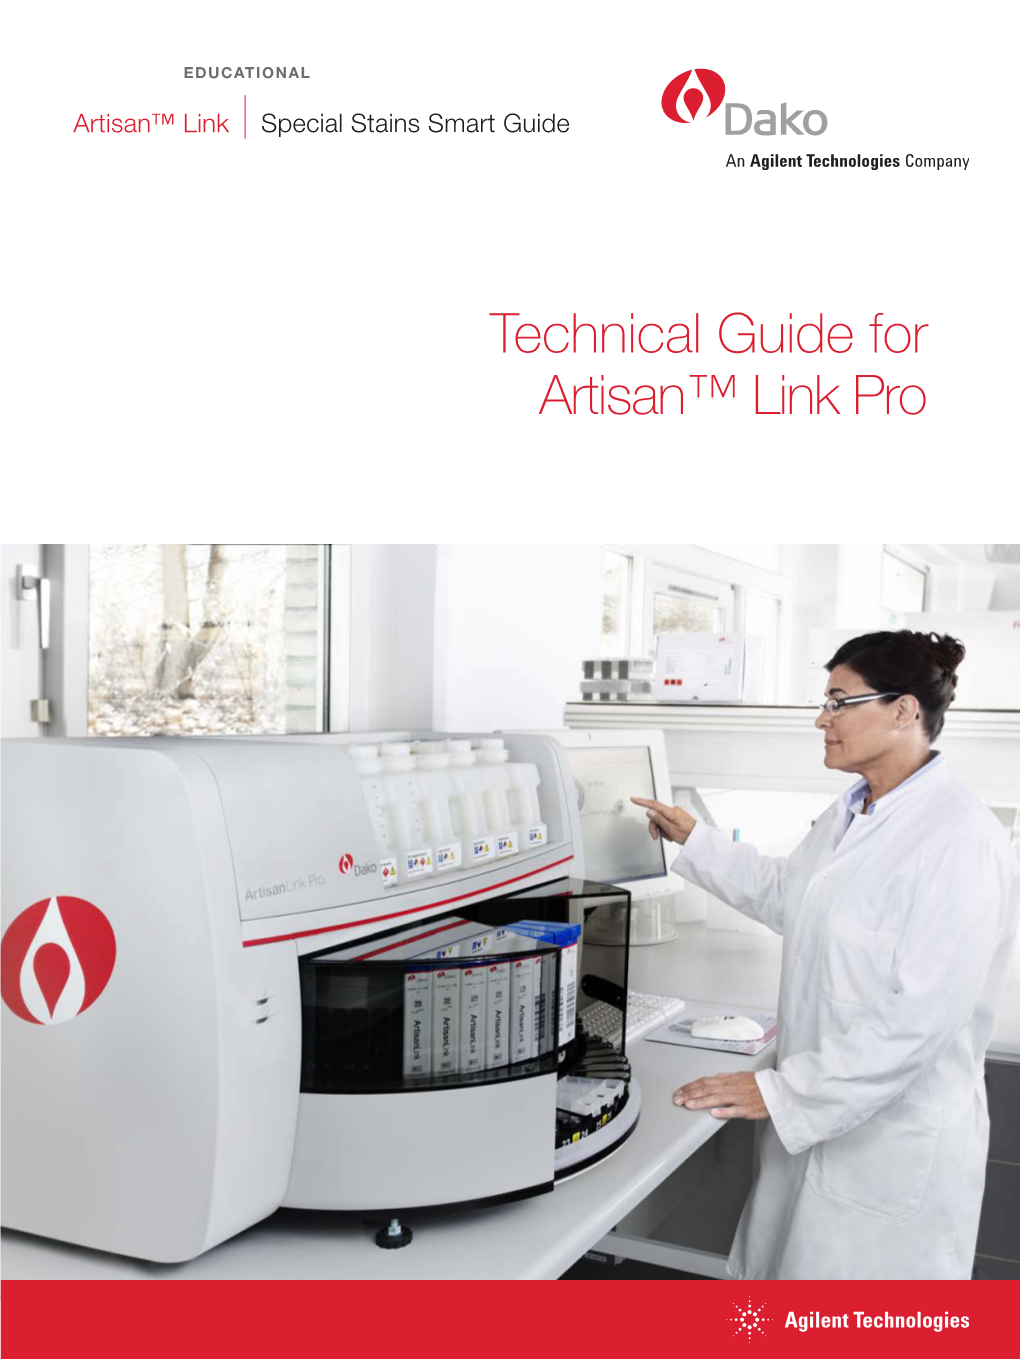 Technical Guide for Artisan™ Link Pro This Document May Not Be Copied in Whole Or in Part Or Reproduced in Any Other Media Without the Written Permission of Dako